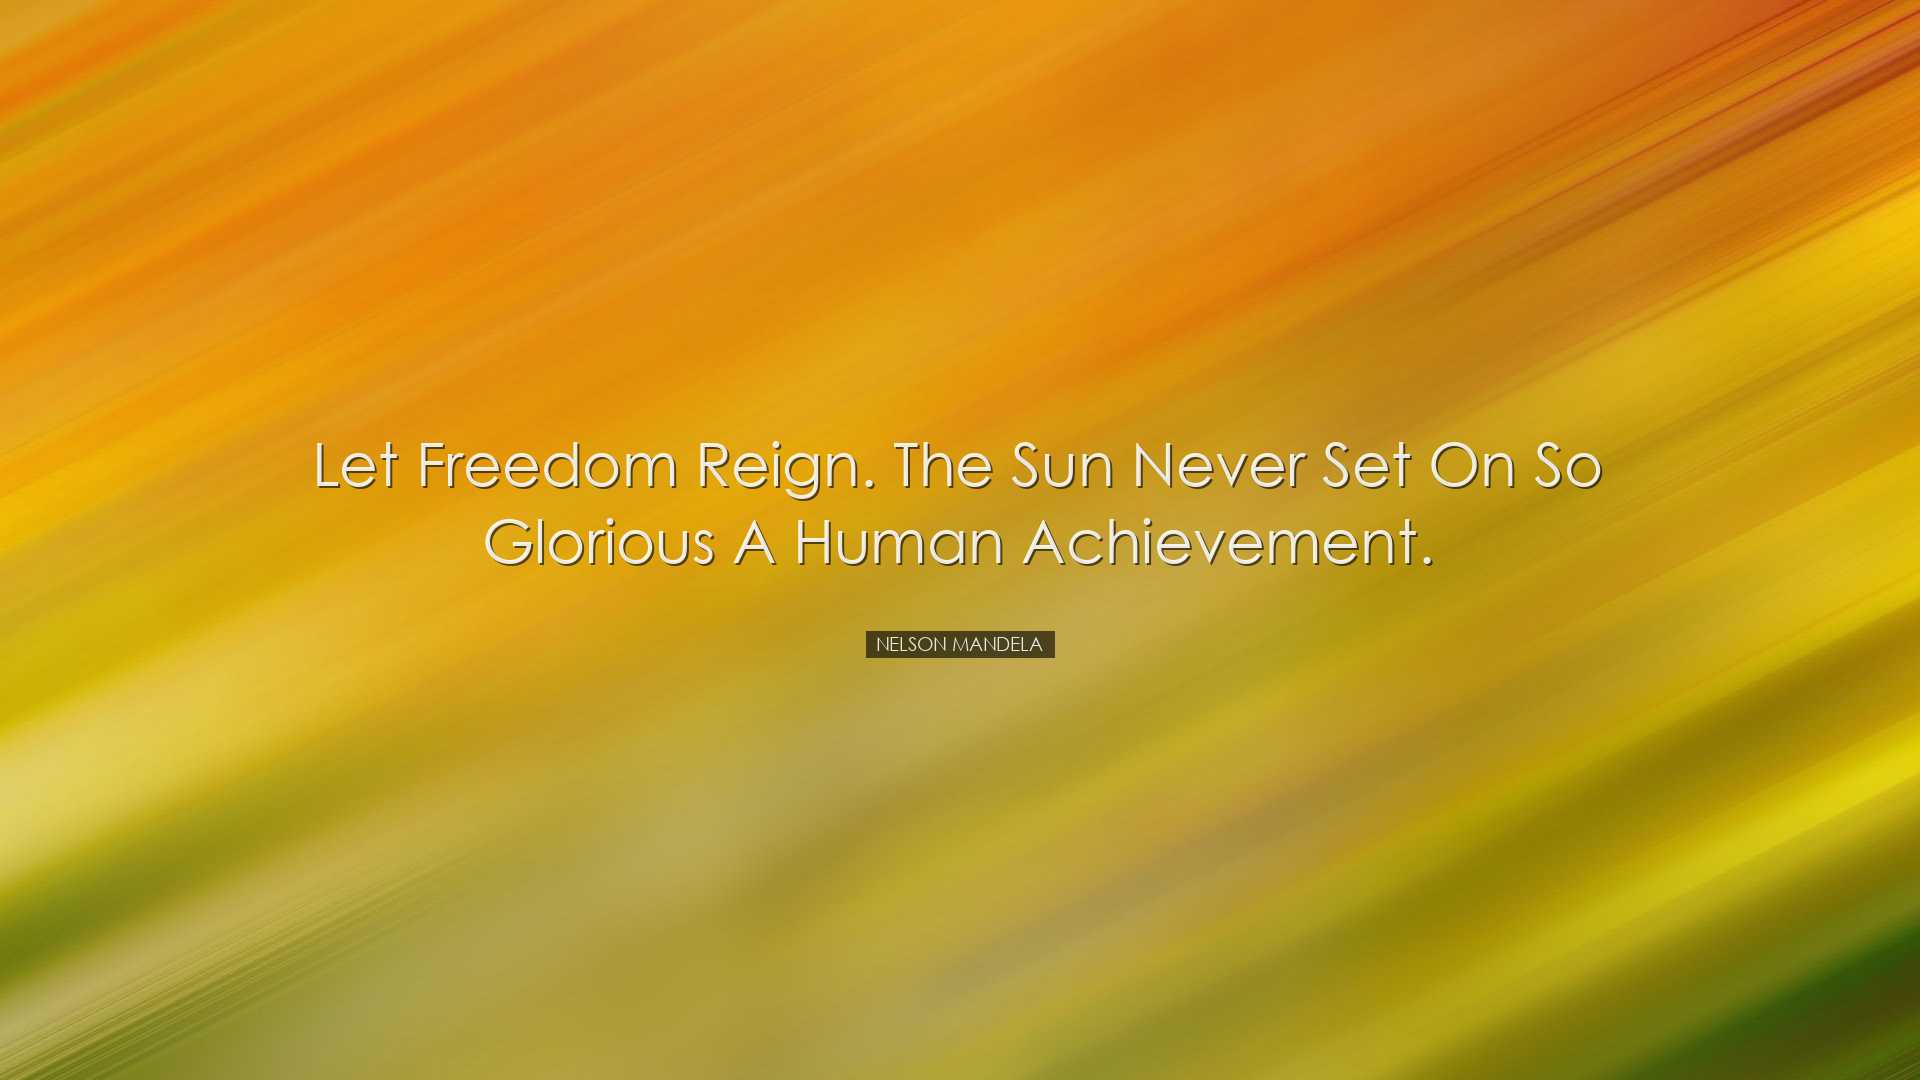 Let freedom reign. The sun never set on so glorious a human achiev